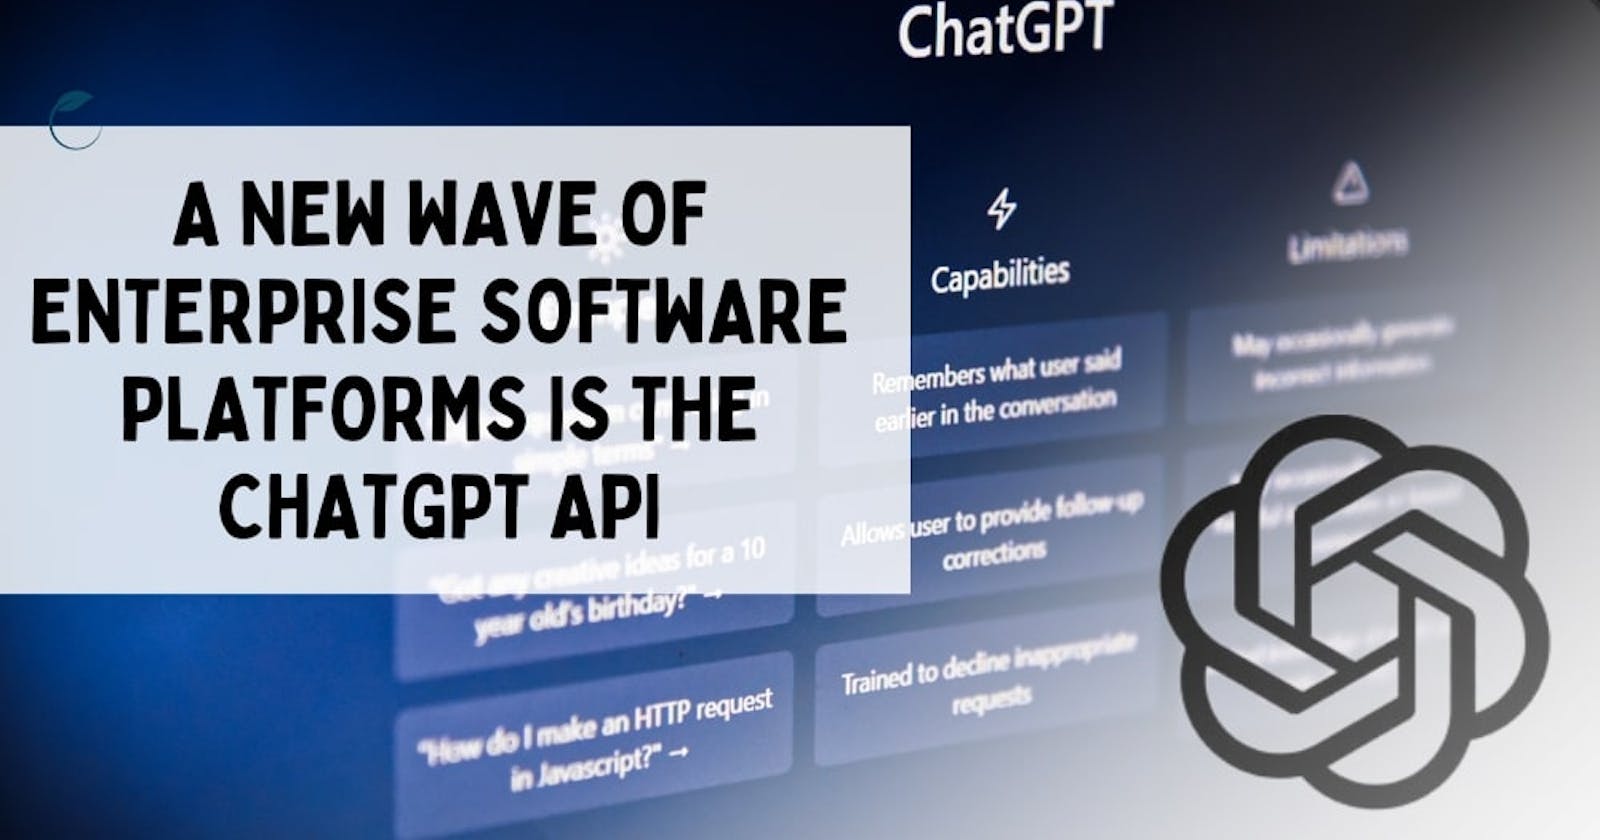 A new wave of Enterprise Software Platforms is the ChatGPT API